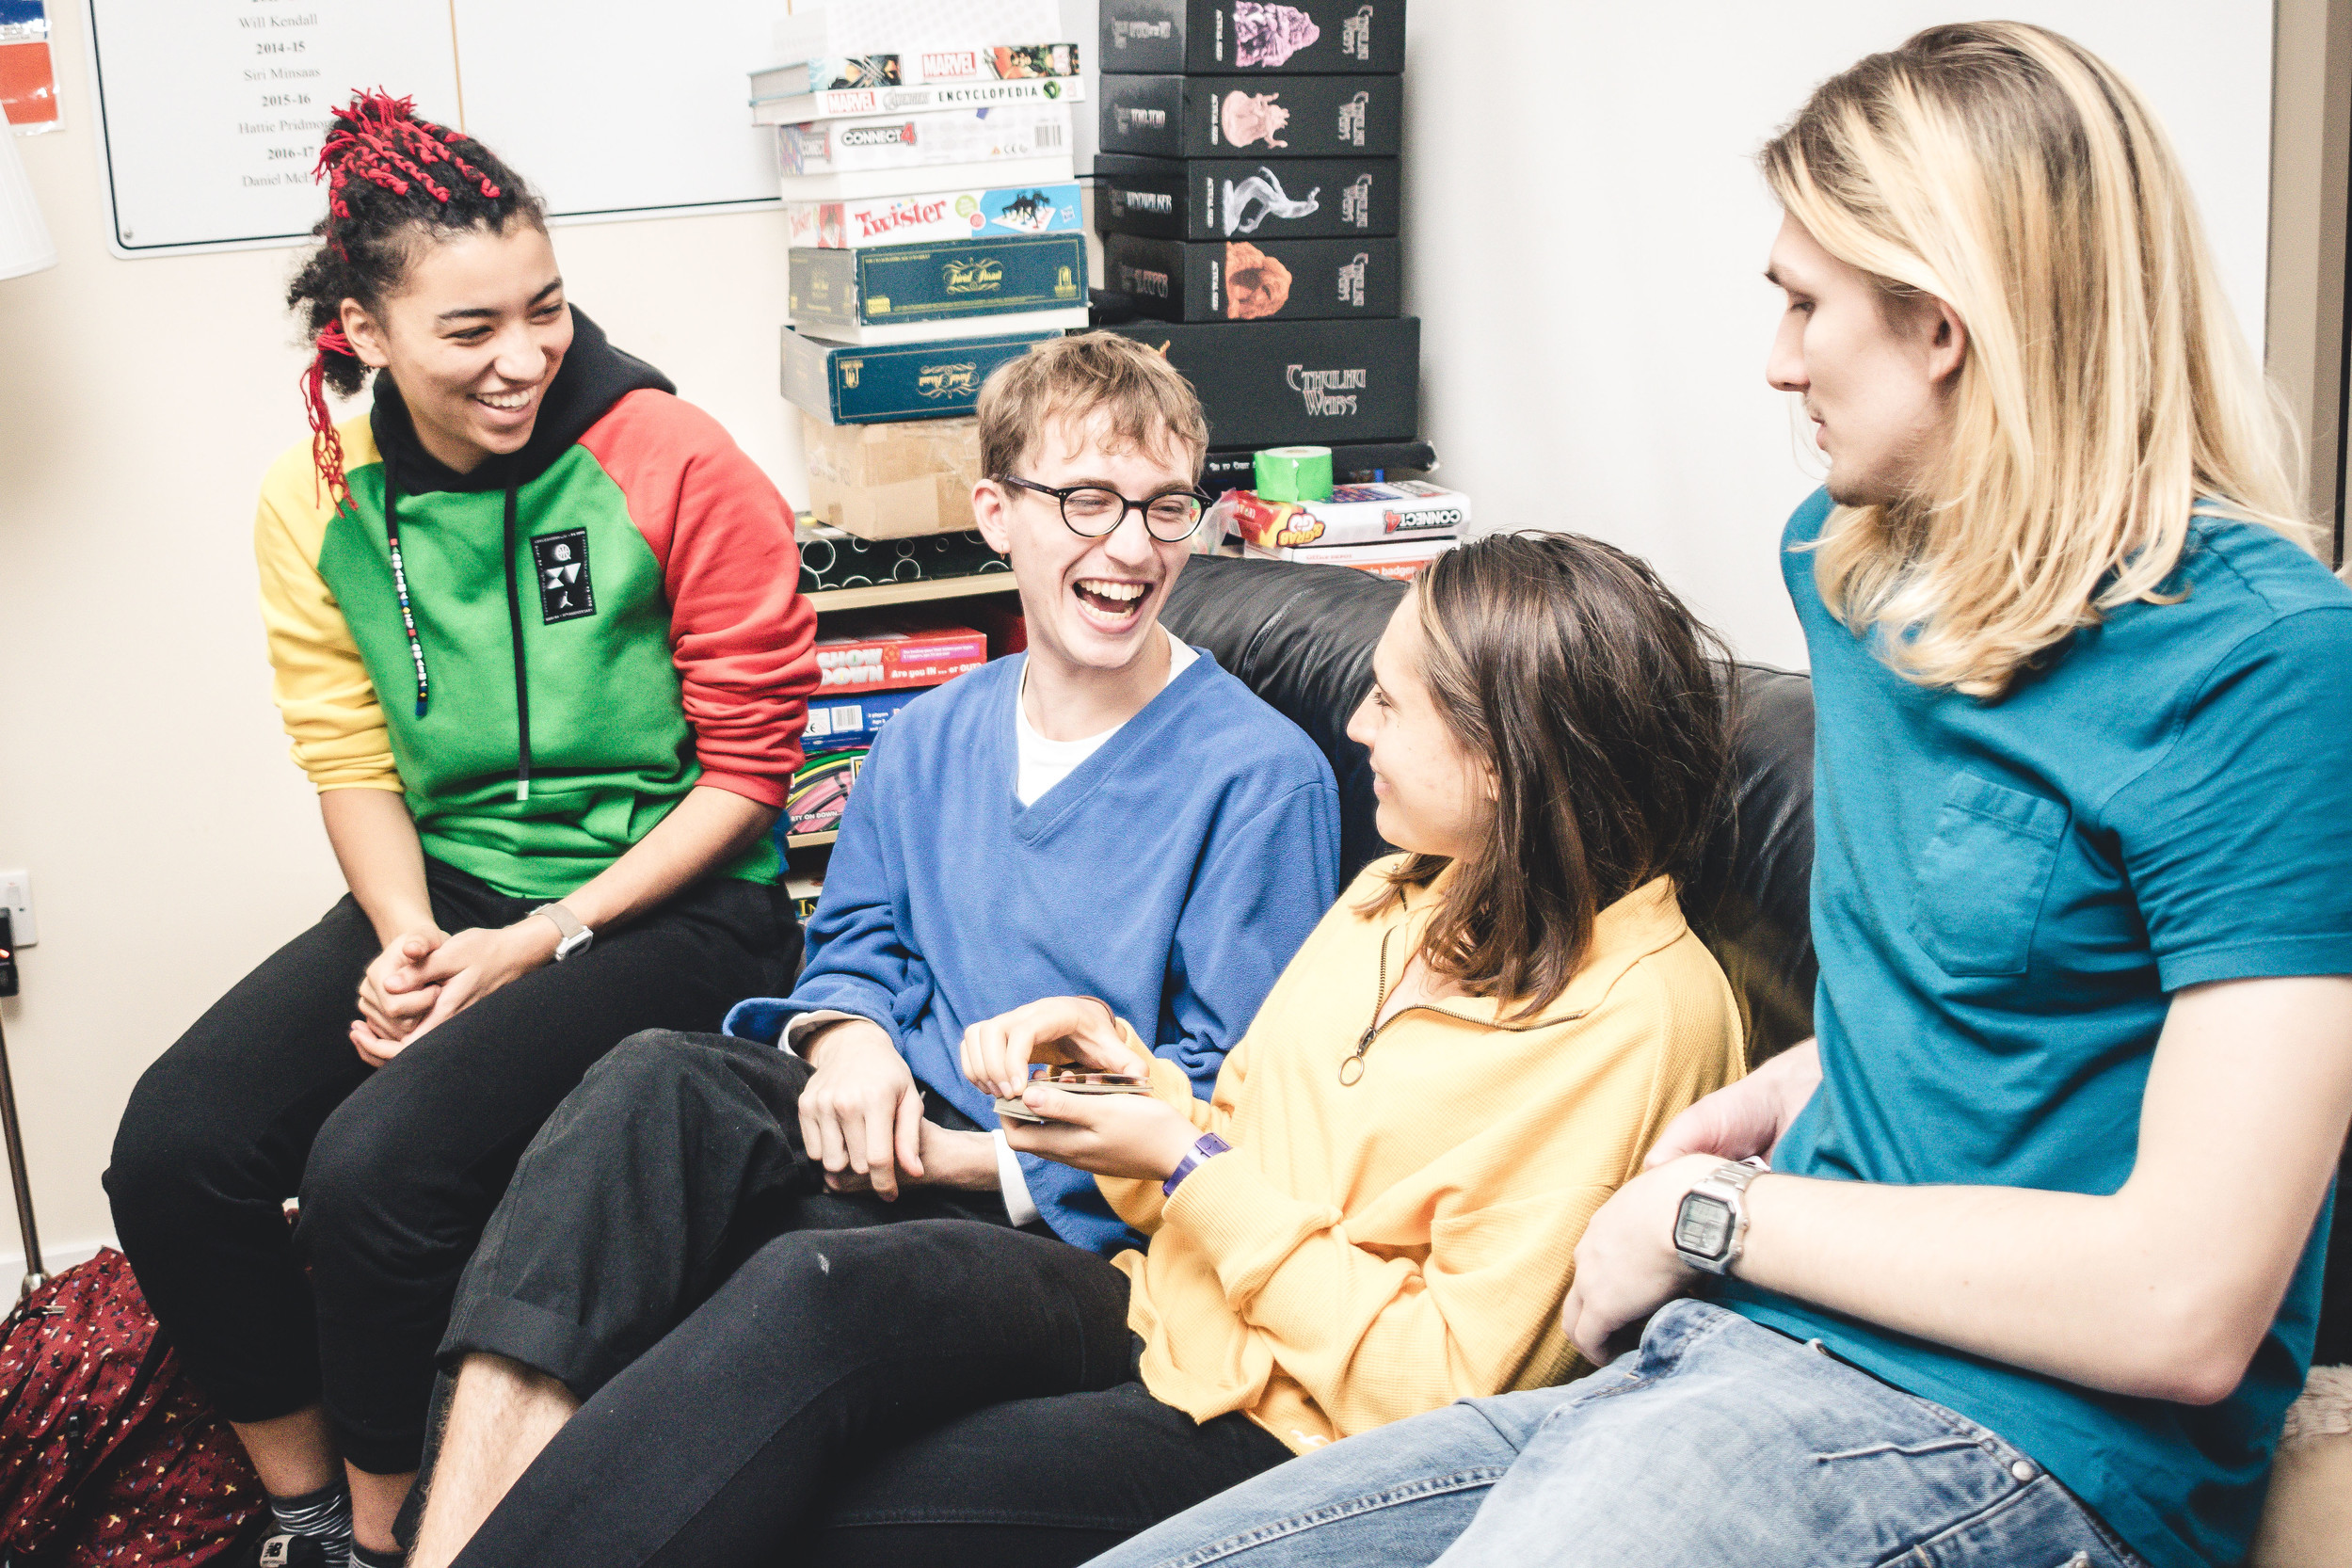 Students chatting and laughing in a shared common room